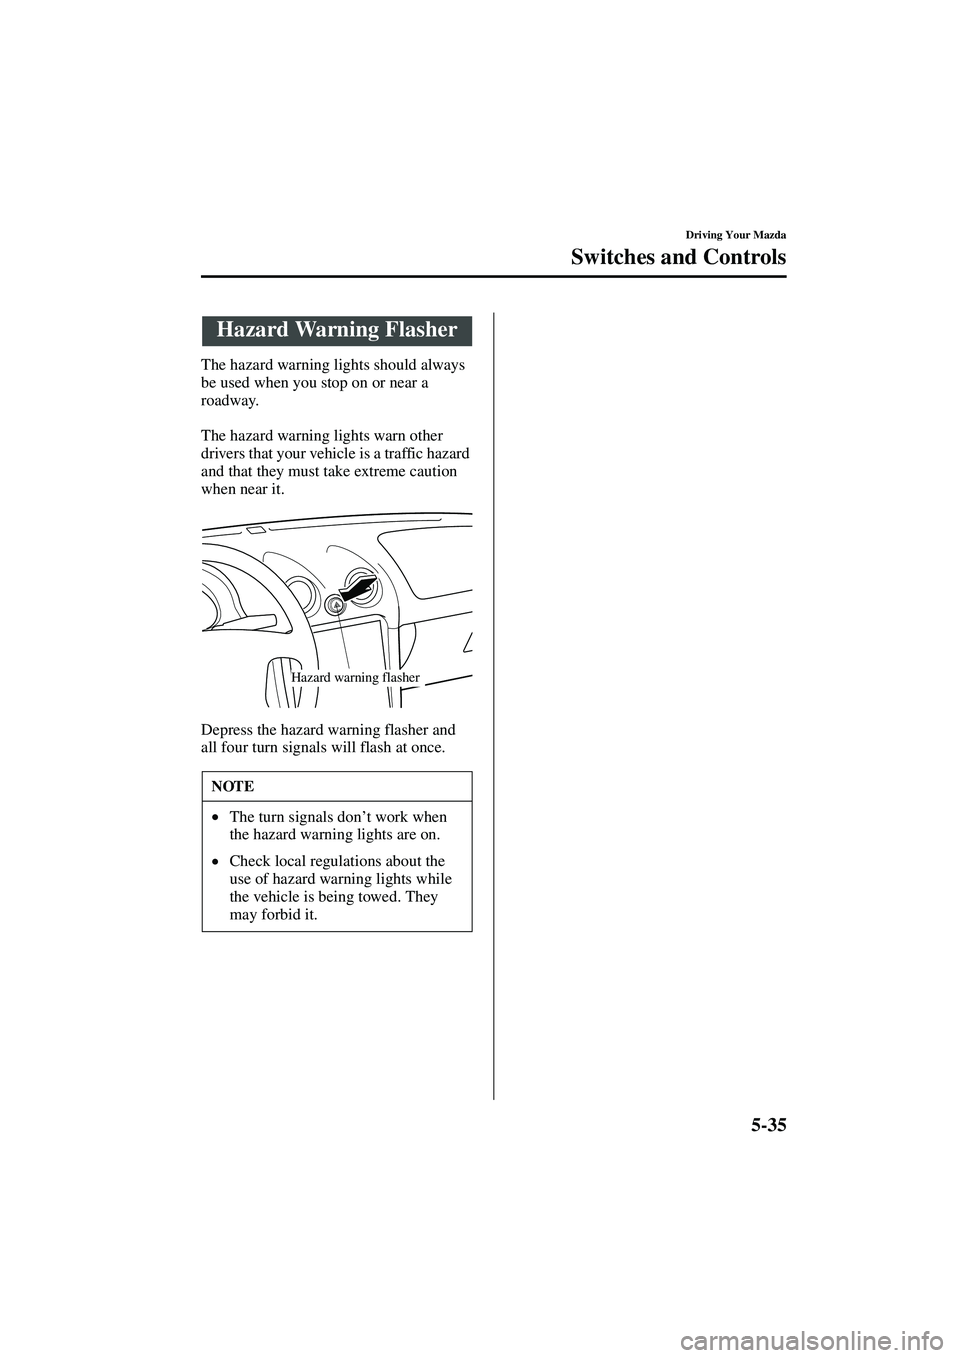 MAZDA MODEL MX-5 MIATA 2003  Owners Manual 5-35
Driving Your Mazda
Switches and Controls
Form No. 8R09-EA-02G
The hazard warning lights should always 
be used when you stop on or near a 
roadway.
The hazard warning lights warn other 
drivers t